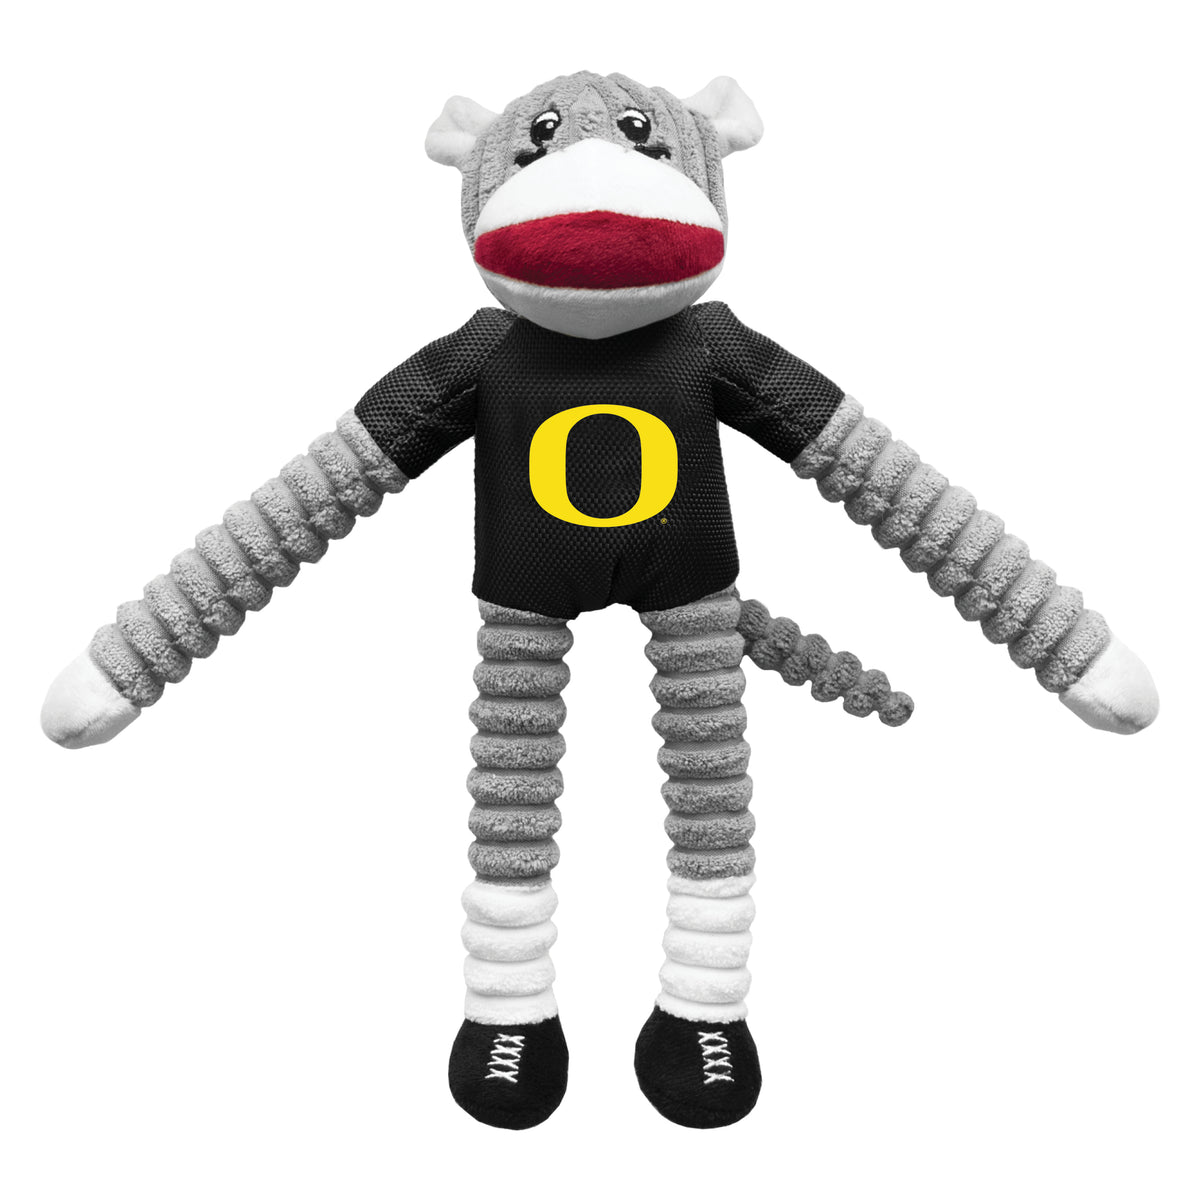 OR Ducks Sock Monkey Toy - 3 Red Rovers